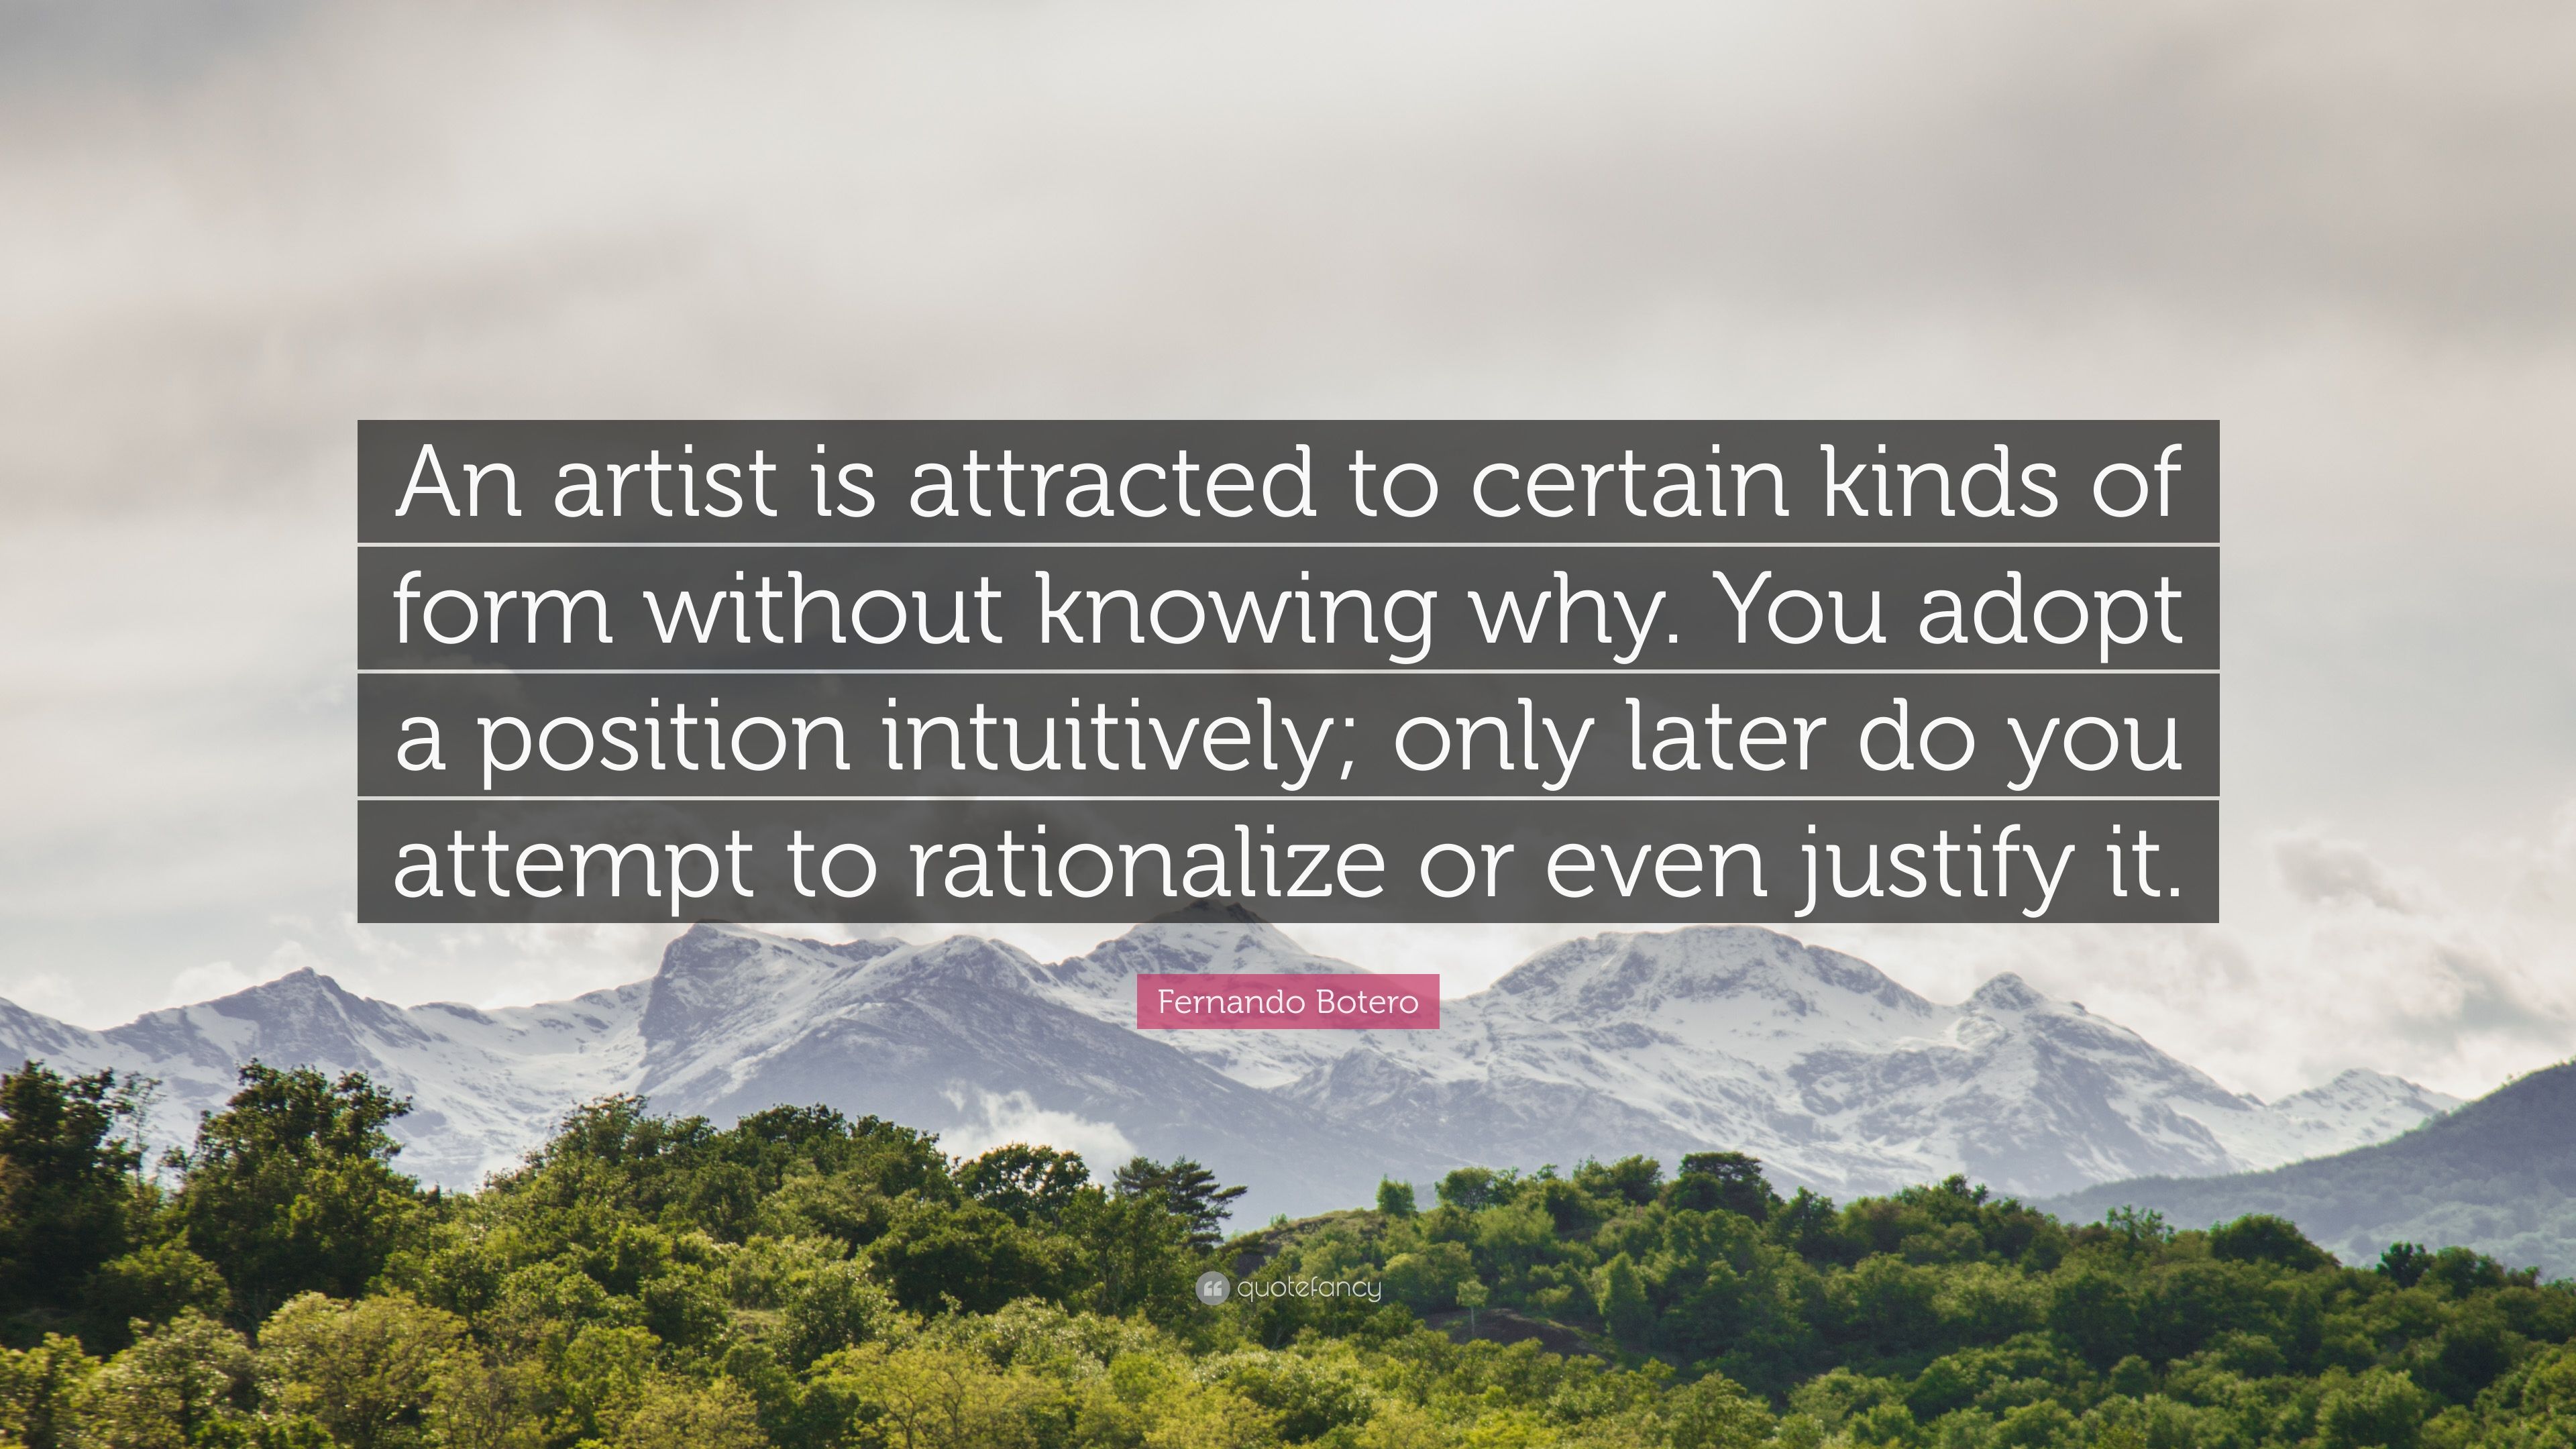 Fernando Botero Quote: “An artist is attracted to certain kinds